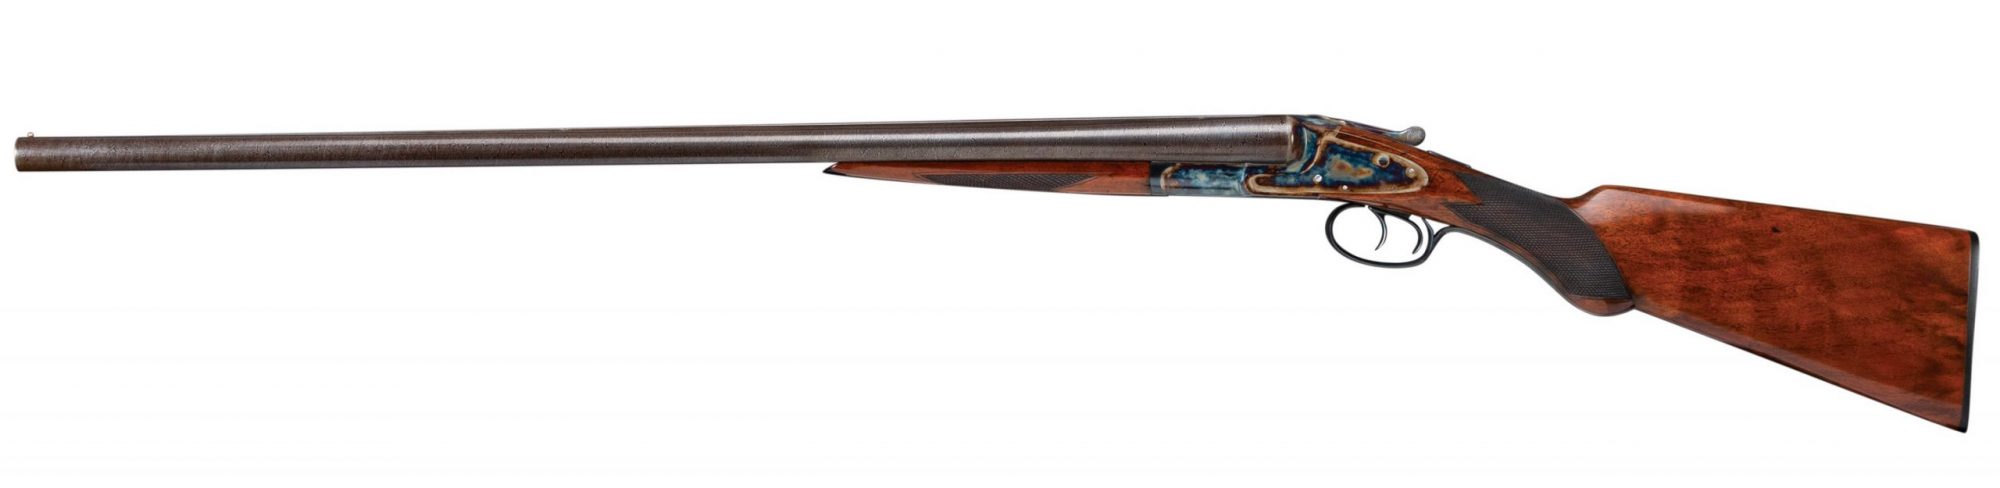 Photo of a restored L.C. Smith 12 gauge shotgun, after restoration work by Turnbull Restoration of Bloomfield NY